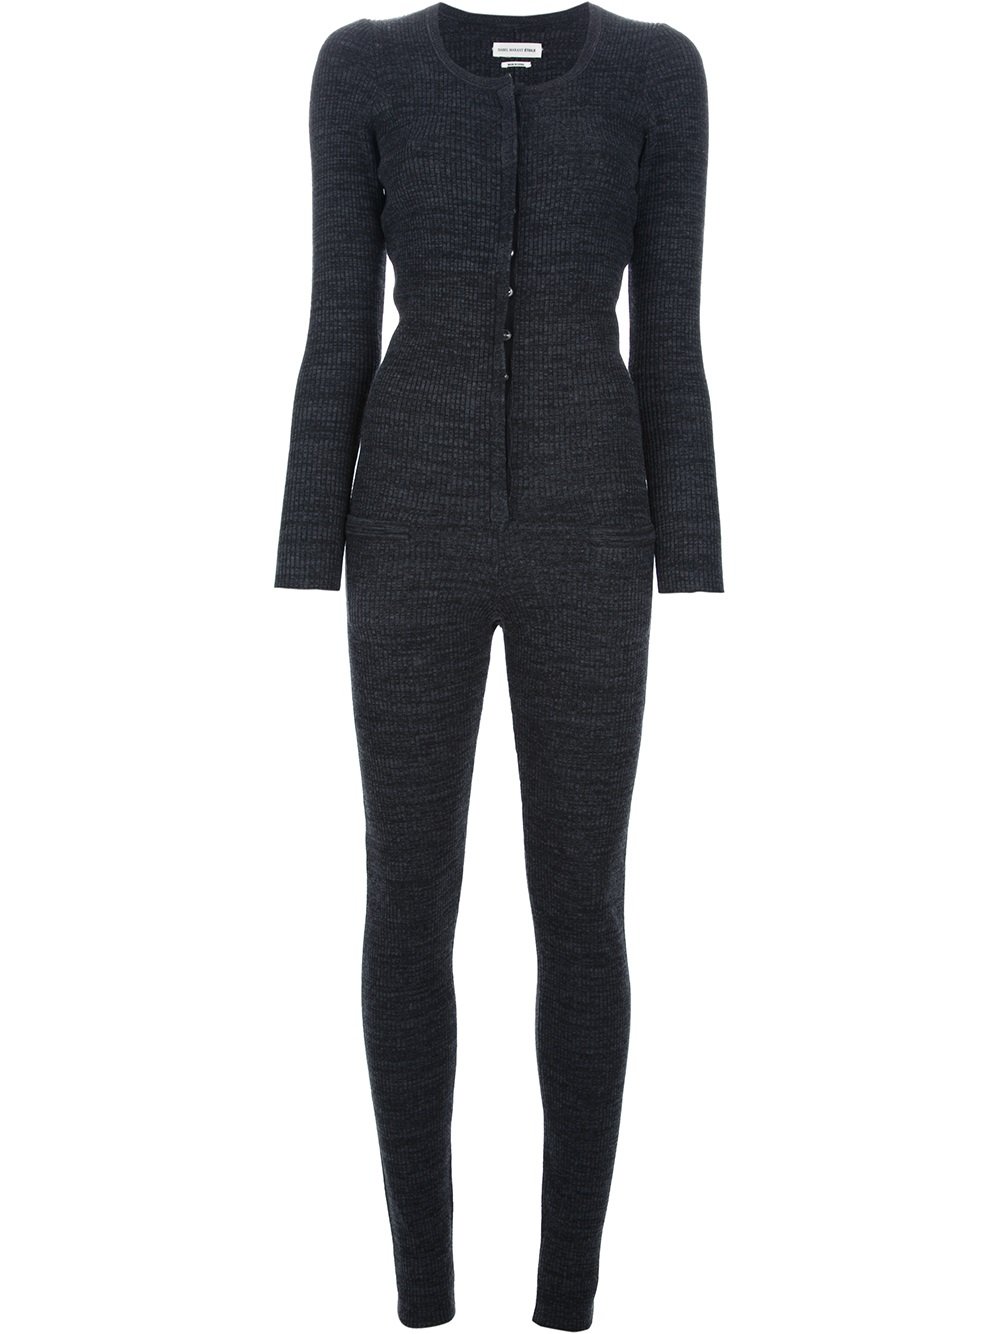 Étoile Isabel Marant Bailes Knitted Jumpsuit in Grey (Gray) - Lyst